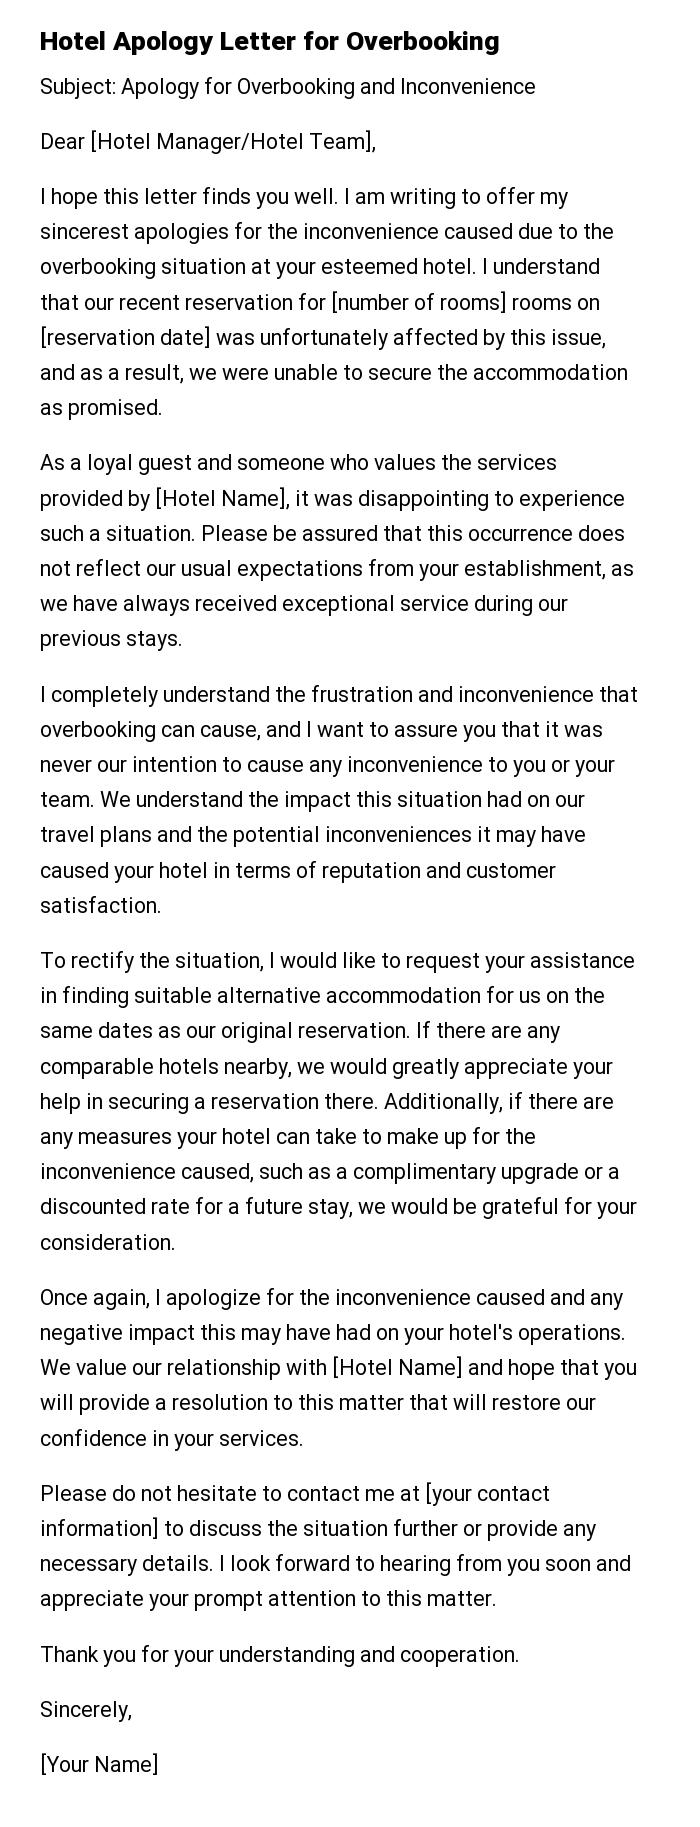 Hotel Apology Letter for Overbooking